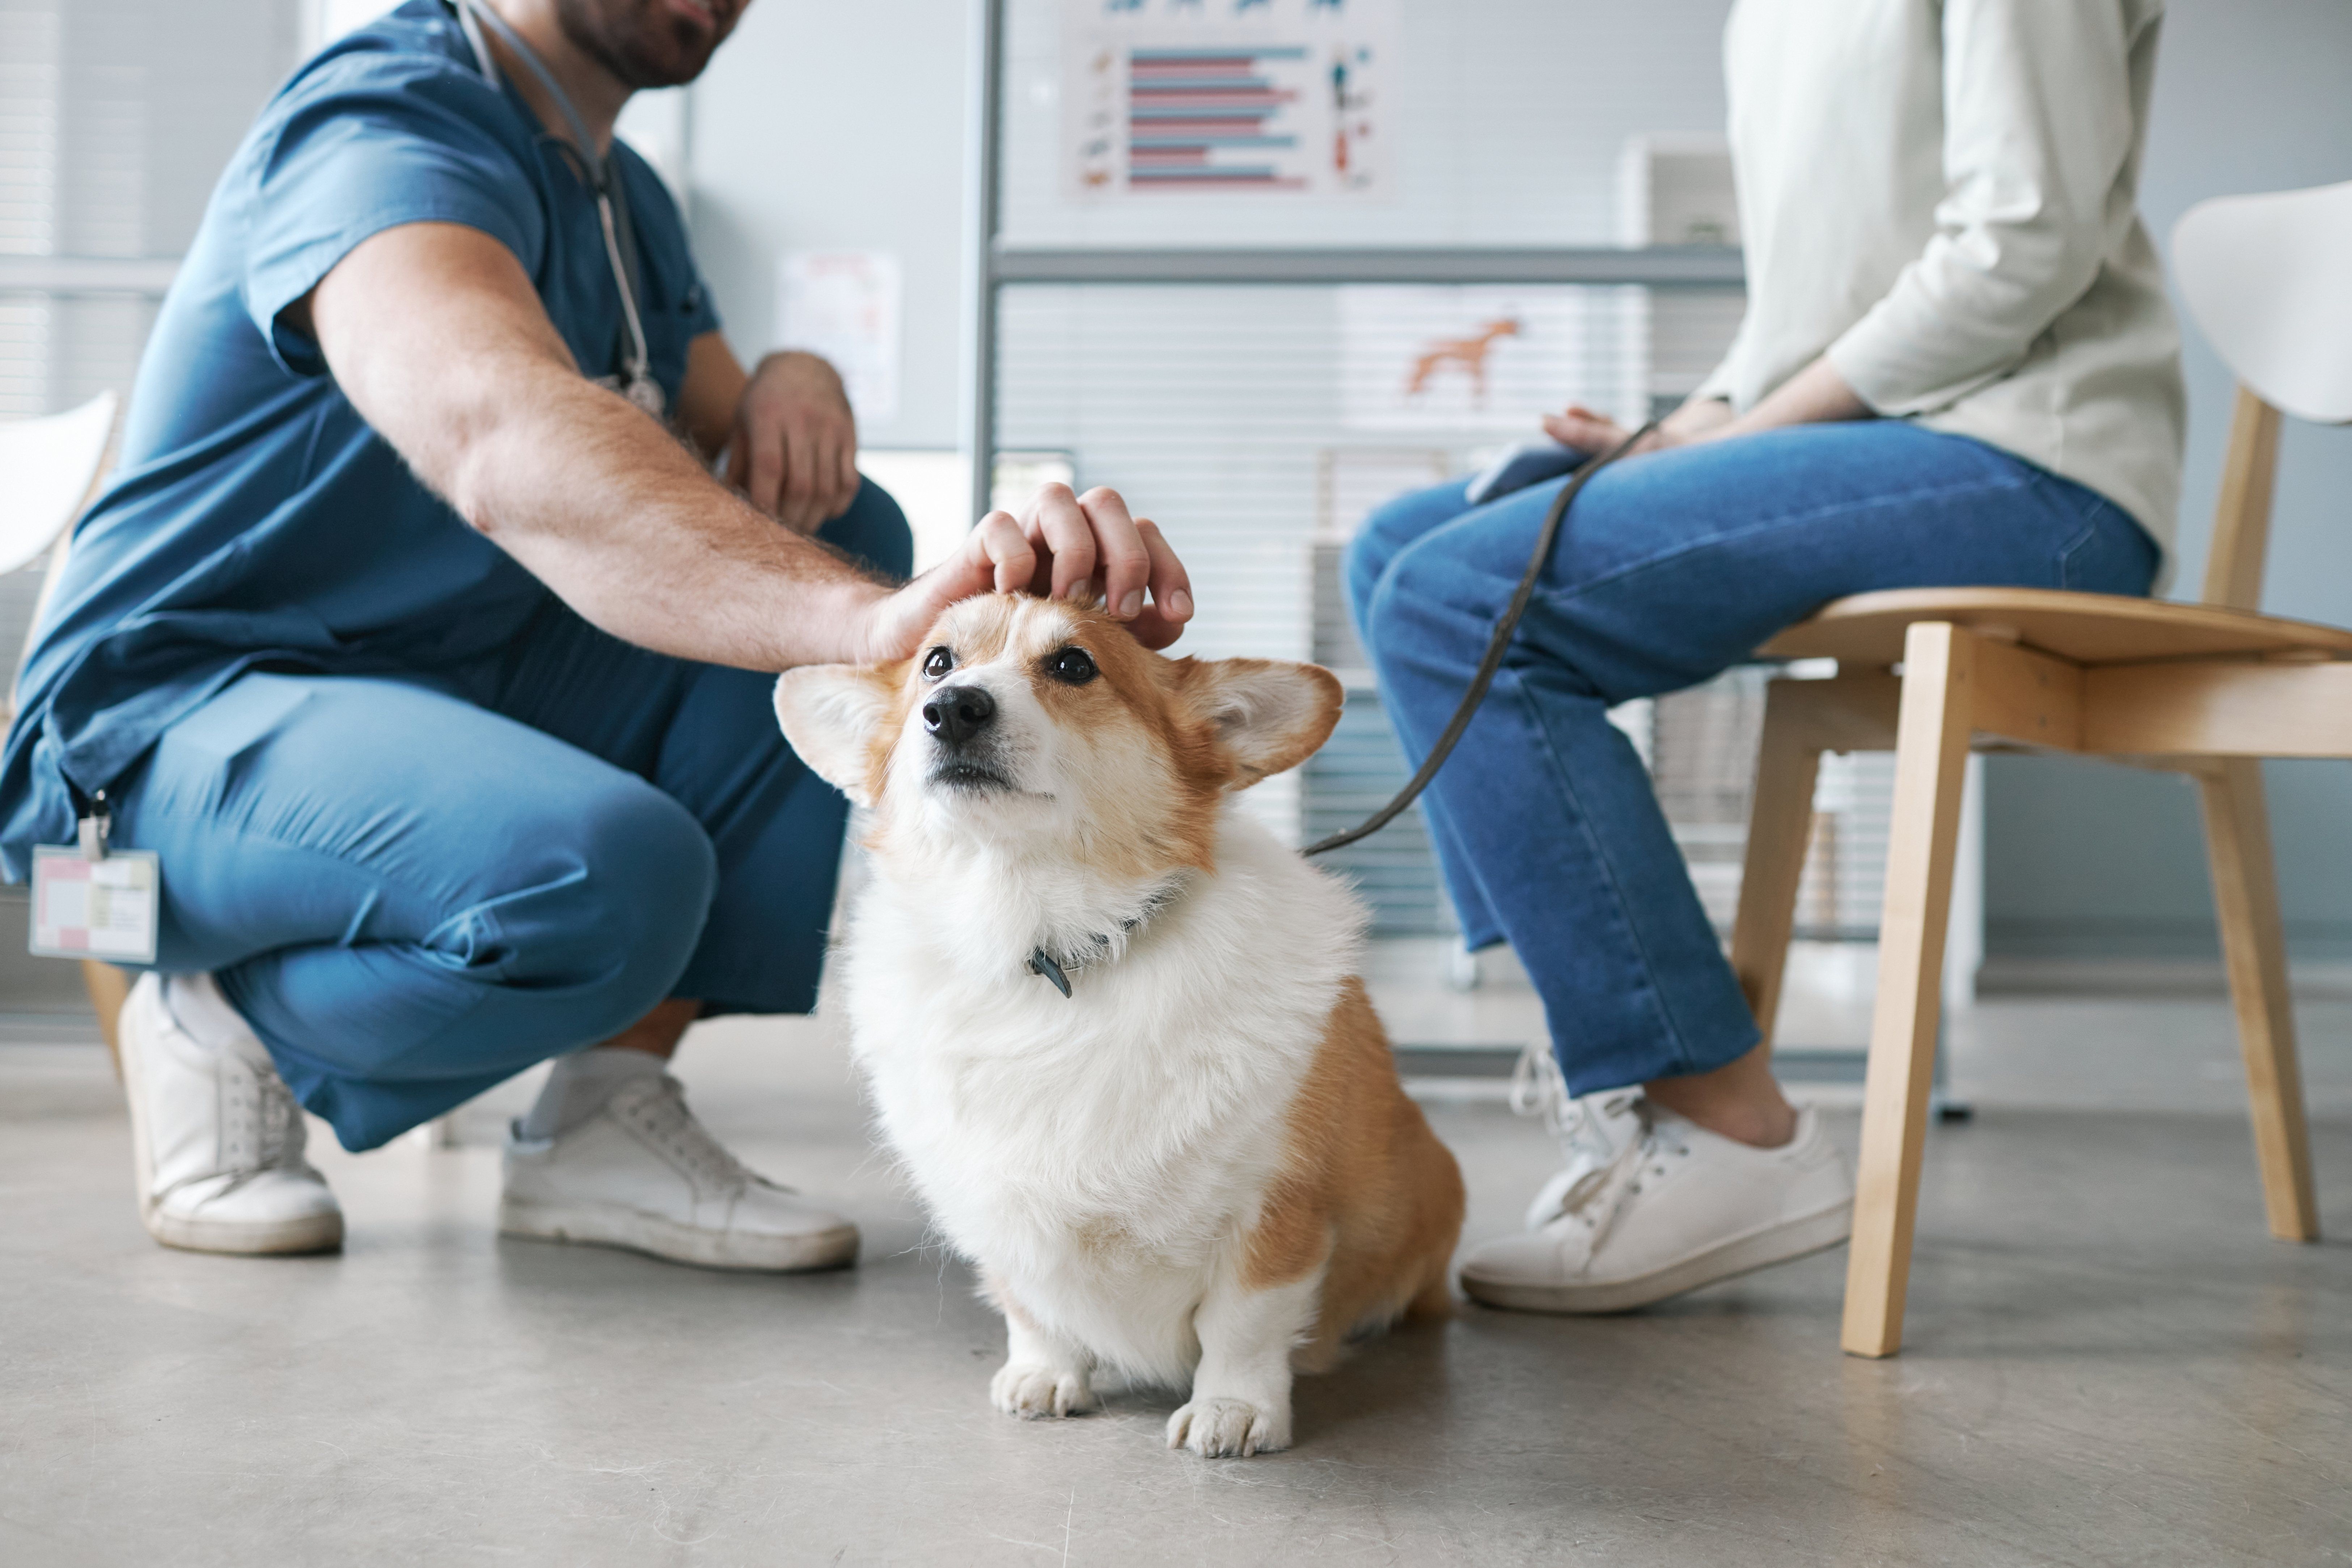 5 Tips for Getting the Most Out of Your Pet's Vet Visits